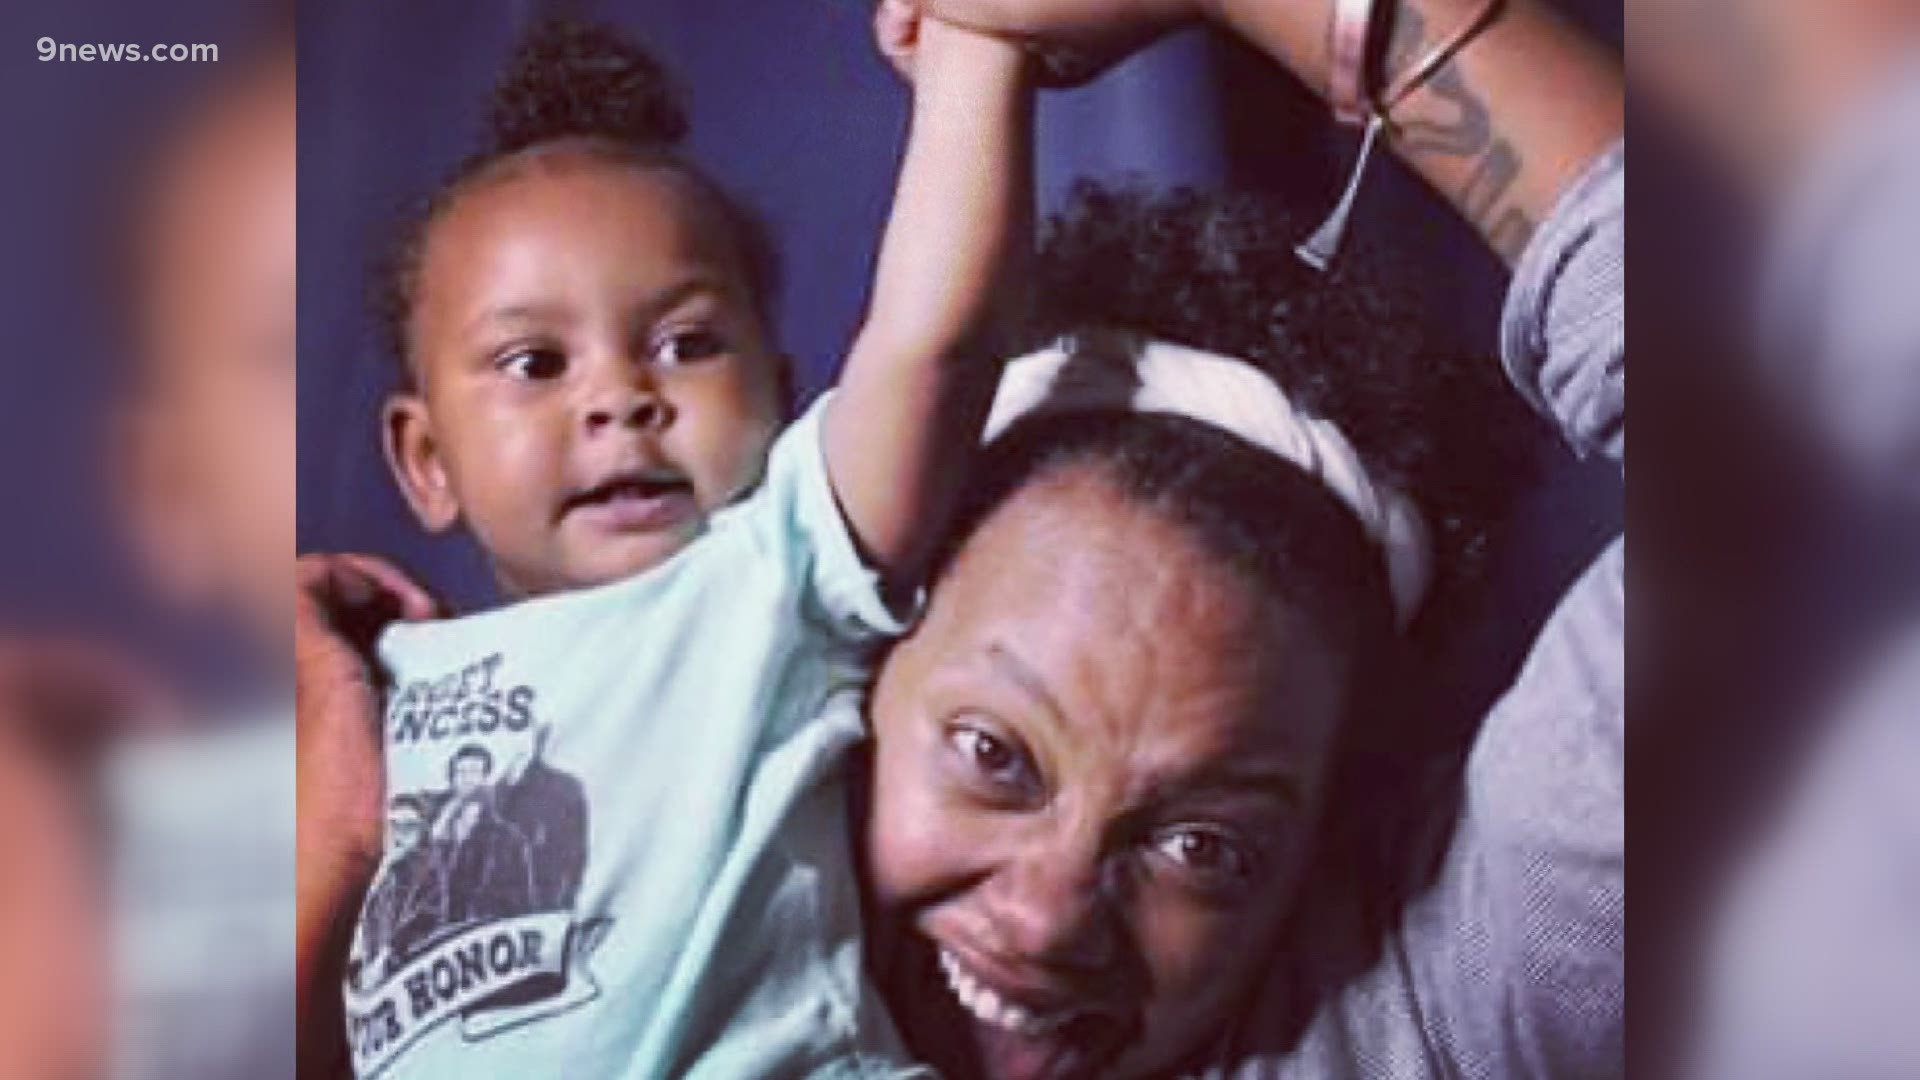 Marpessa Allen is a doula who provides support and knowledge during pregnancy and delivery. It's a position rich with cultural significance in the Black community.